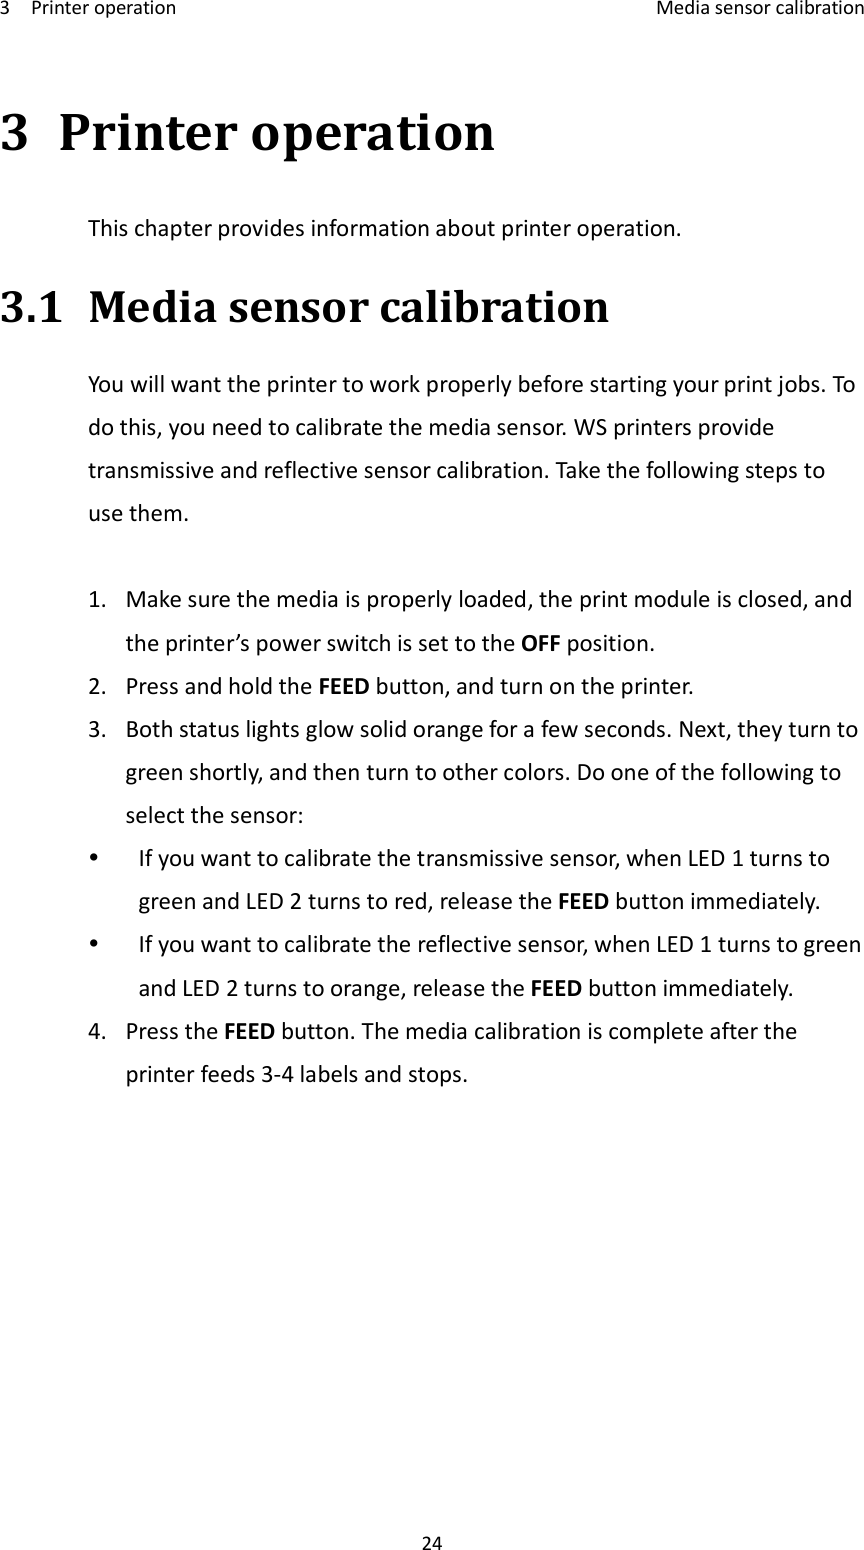 3    Printer operation    Media sensor calibration 24 3 Printer operation This chapter provides information about printer operation. 3.1 Media sensor calibration You will want the printer to work properly before starting your print jobs. To do this, you need to calibrate the media sensor. WS printers provide transmissive and reflective sensor calibration. Take the following steps to use them.  1. Make sure the media is properly loaded, the print module is closed, and the printer’s power switch is set to the OFF position. 2. Press and hold the FEED button, and turn on the printer. 3. Both status lights glow solid orange for a few seconds. Next, they turn to green shortly, and then turn to other colors. Do one of the following to select the sensor:  If you want to calibrate the transmissive sensor, when LED 1 turns to green and LED 2 turns to red, release the FEED button immediately.  If you want to calibrate the reflective sensor, when LED 1 turns to green and LED 2 turns to orange, release the FEED button immediately. 4. Press the FEED button. The media calibration is complete after the printer feeds 3-4 labels and stops.     